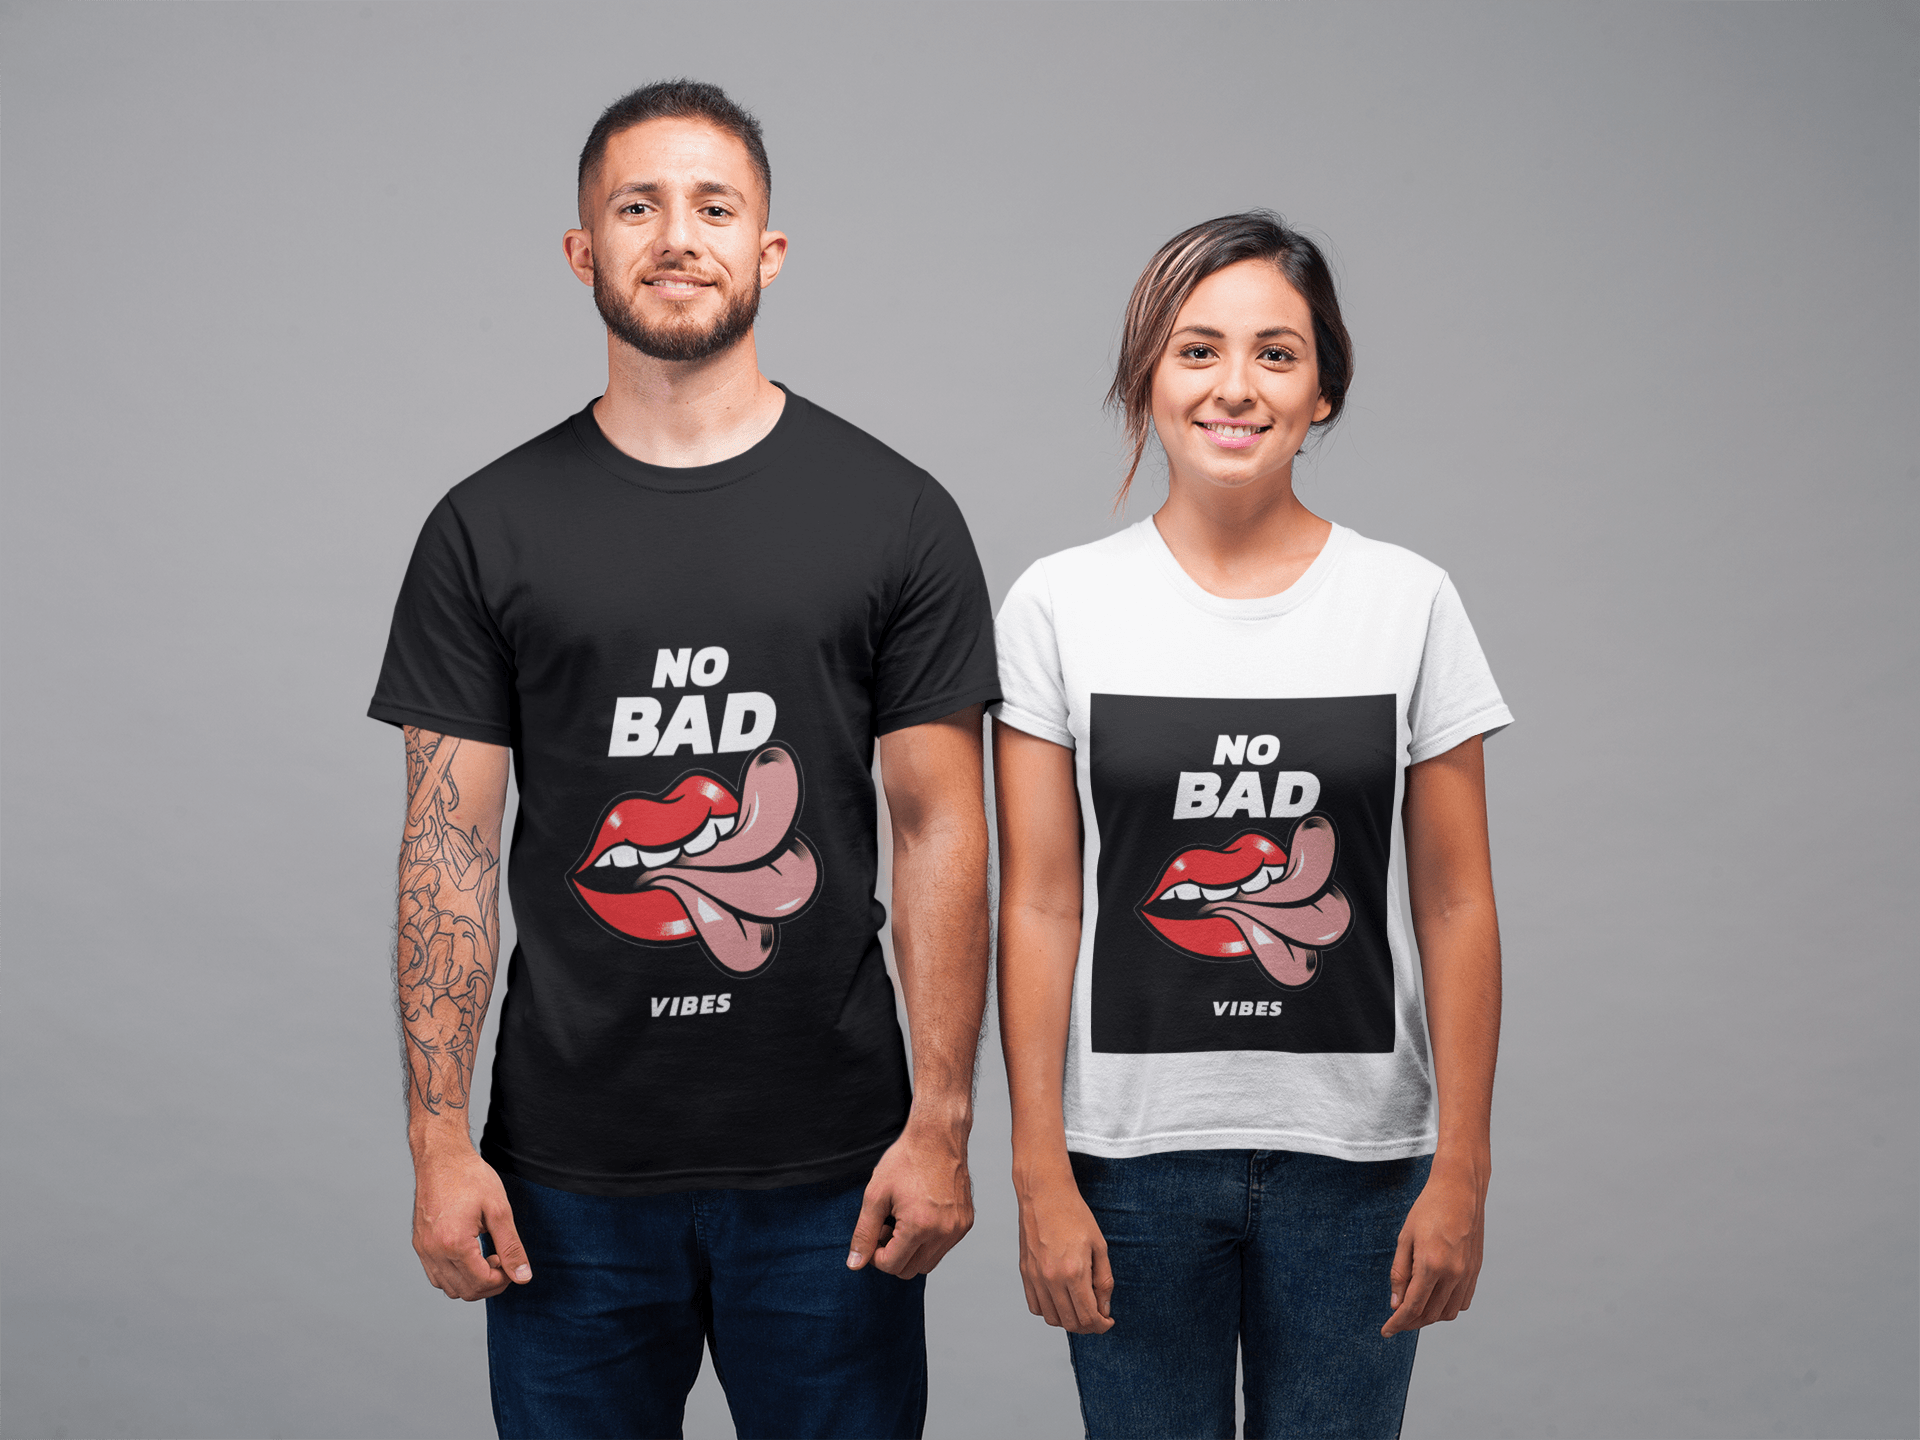 mockup of a man and a woman wearing t shirts and smiling in a studio 22345